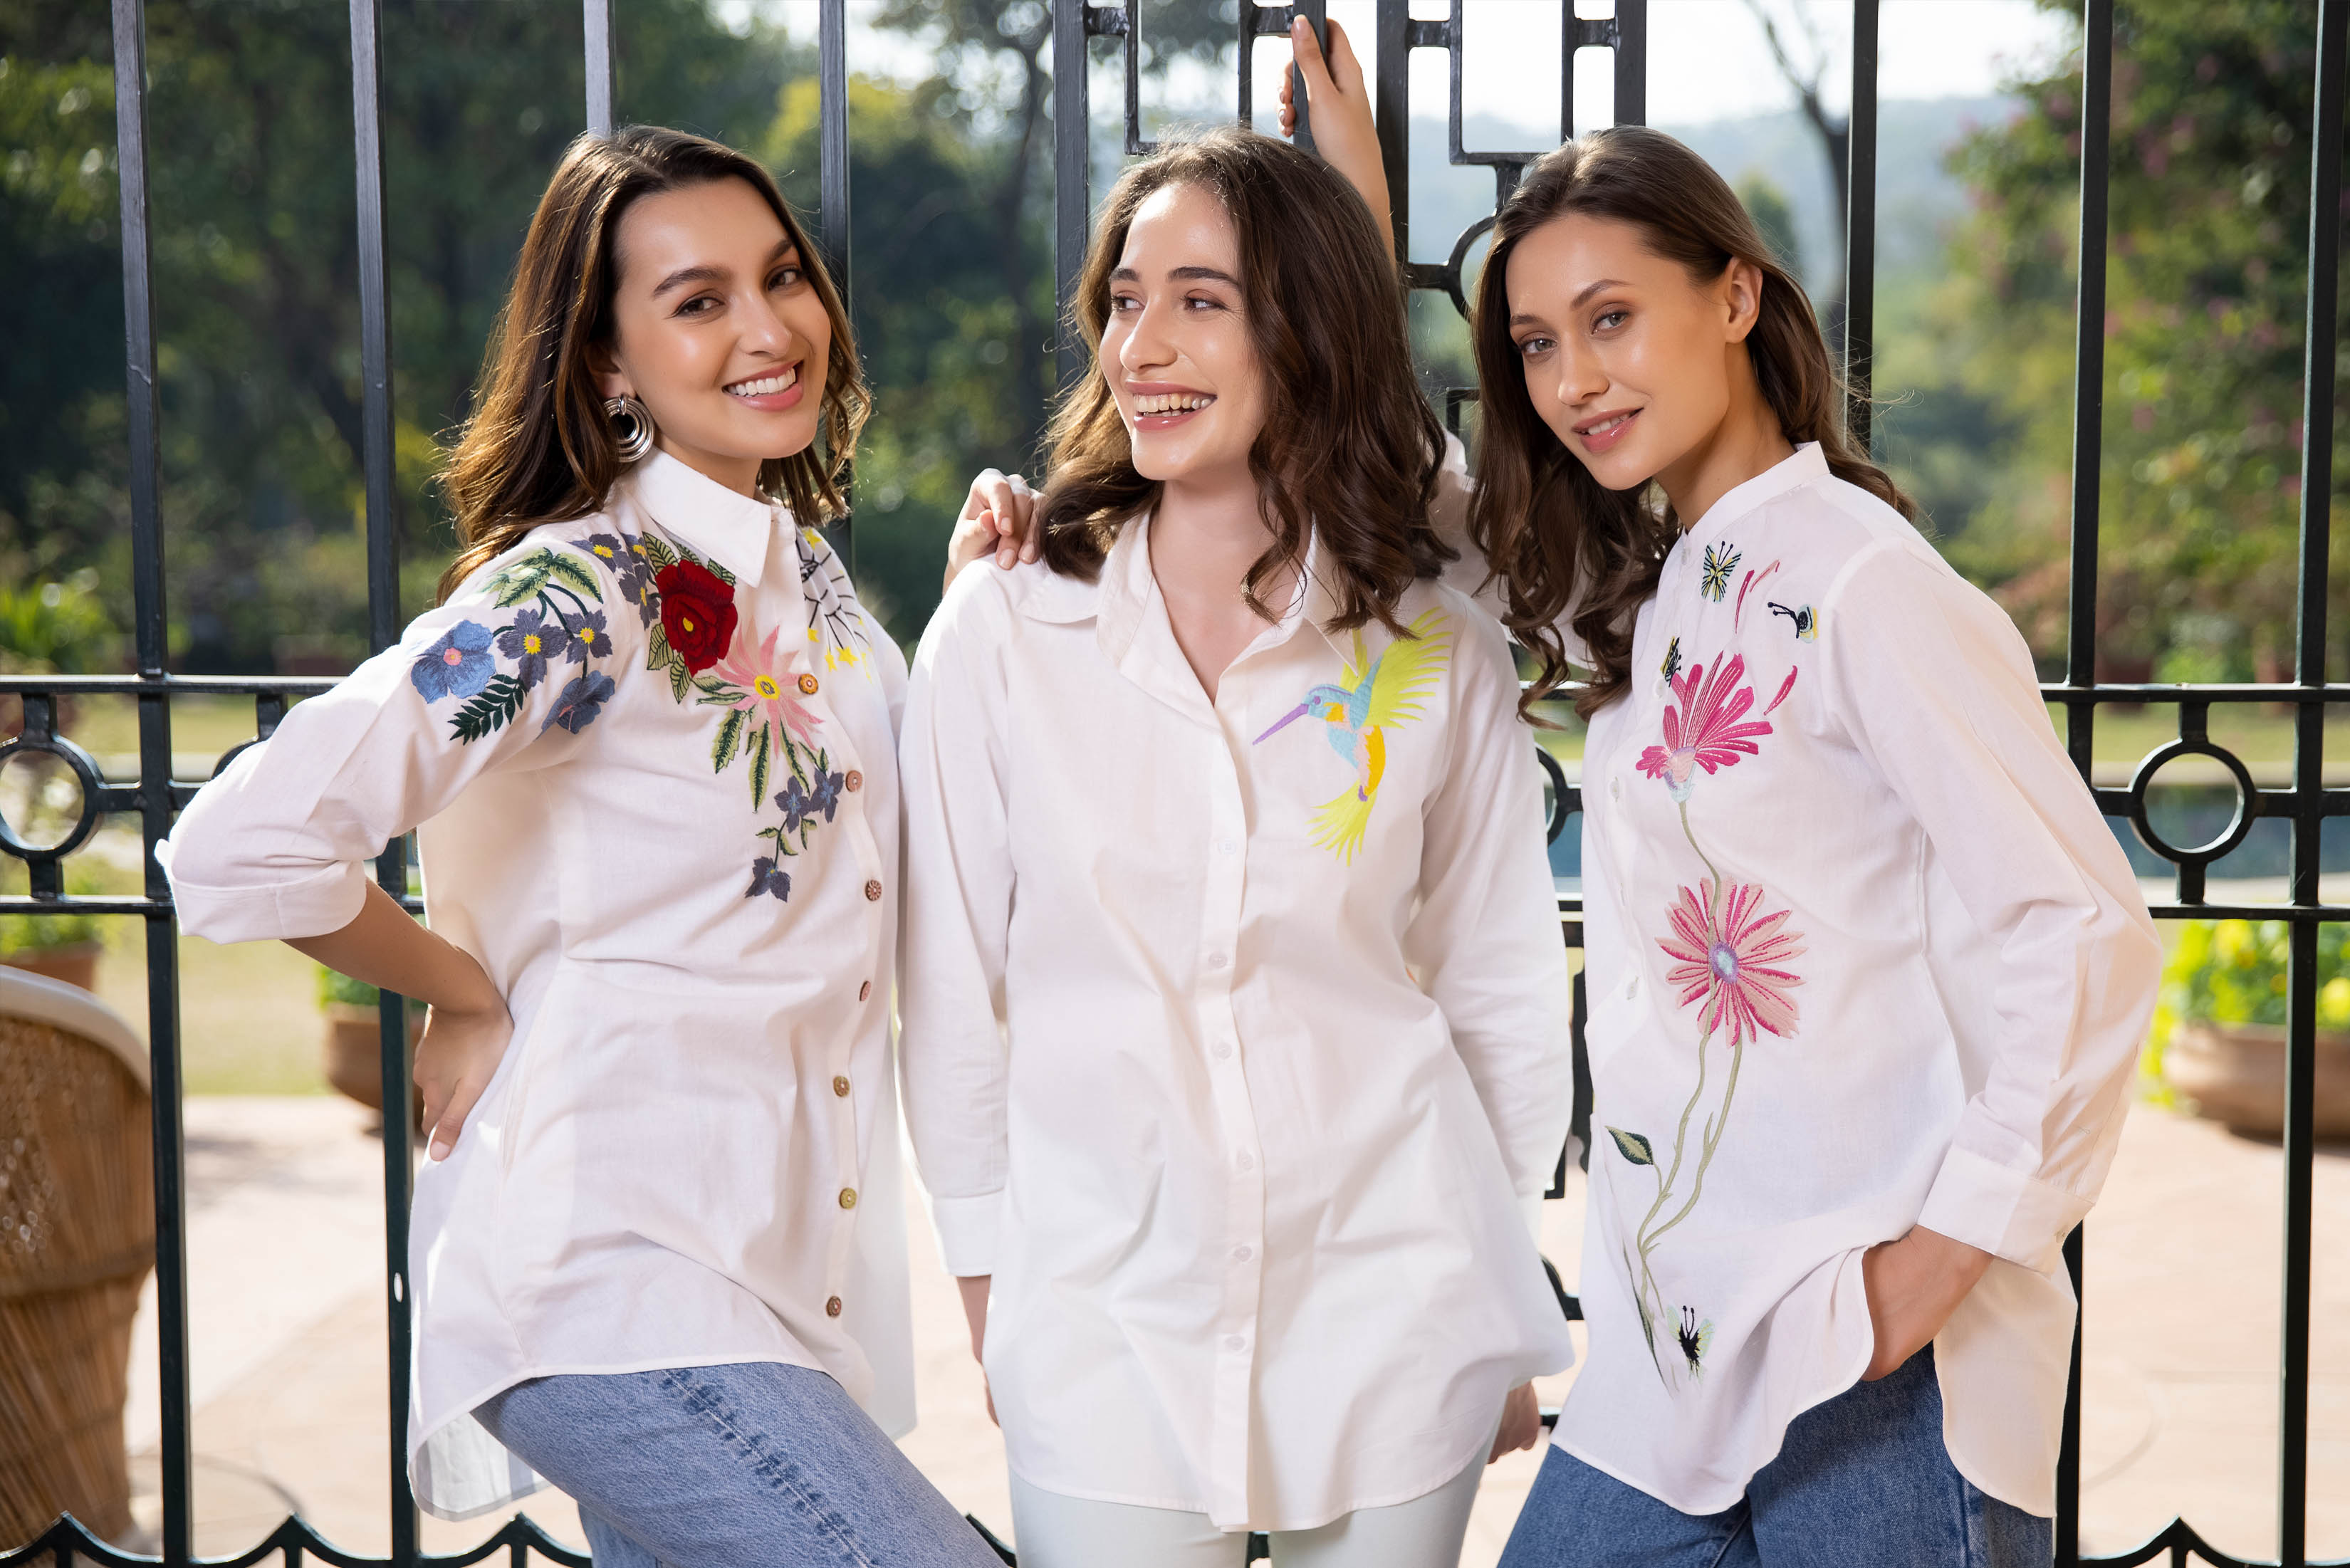 Siddhaarth Oberoi Shirts, a high-end label based in Noida unveils everyday wear "Shirts"